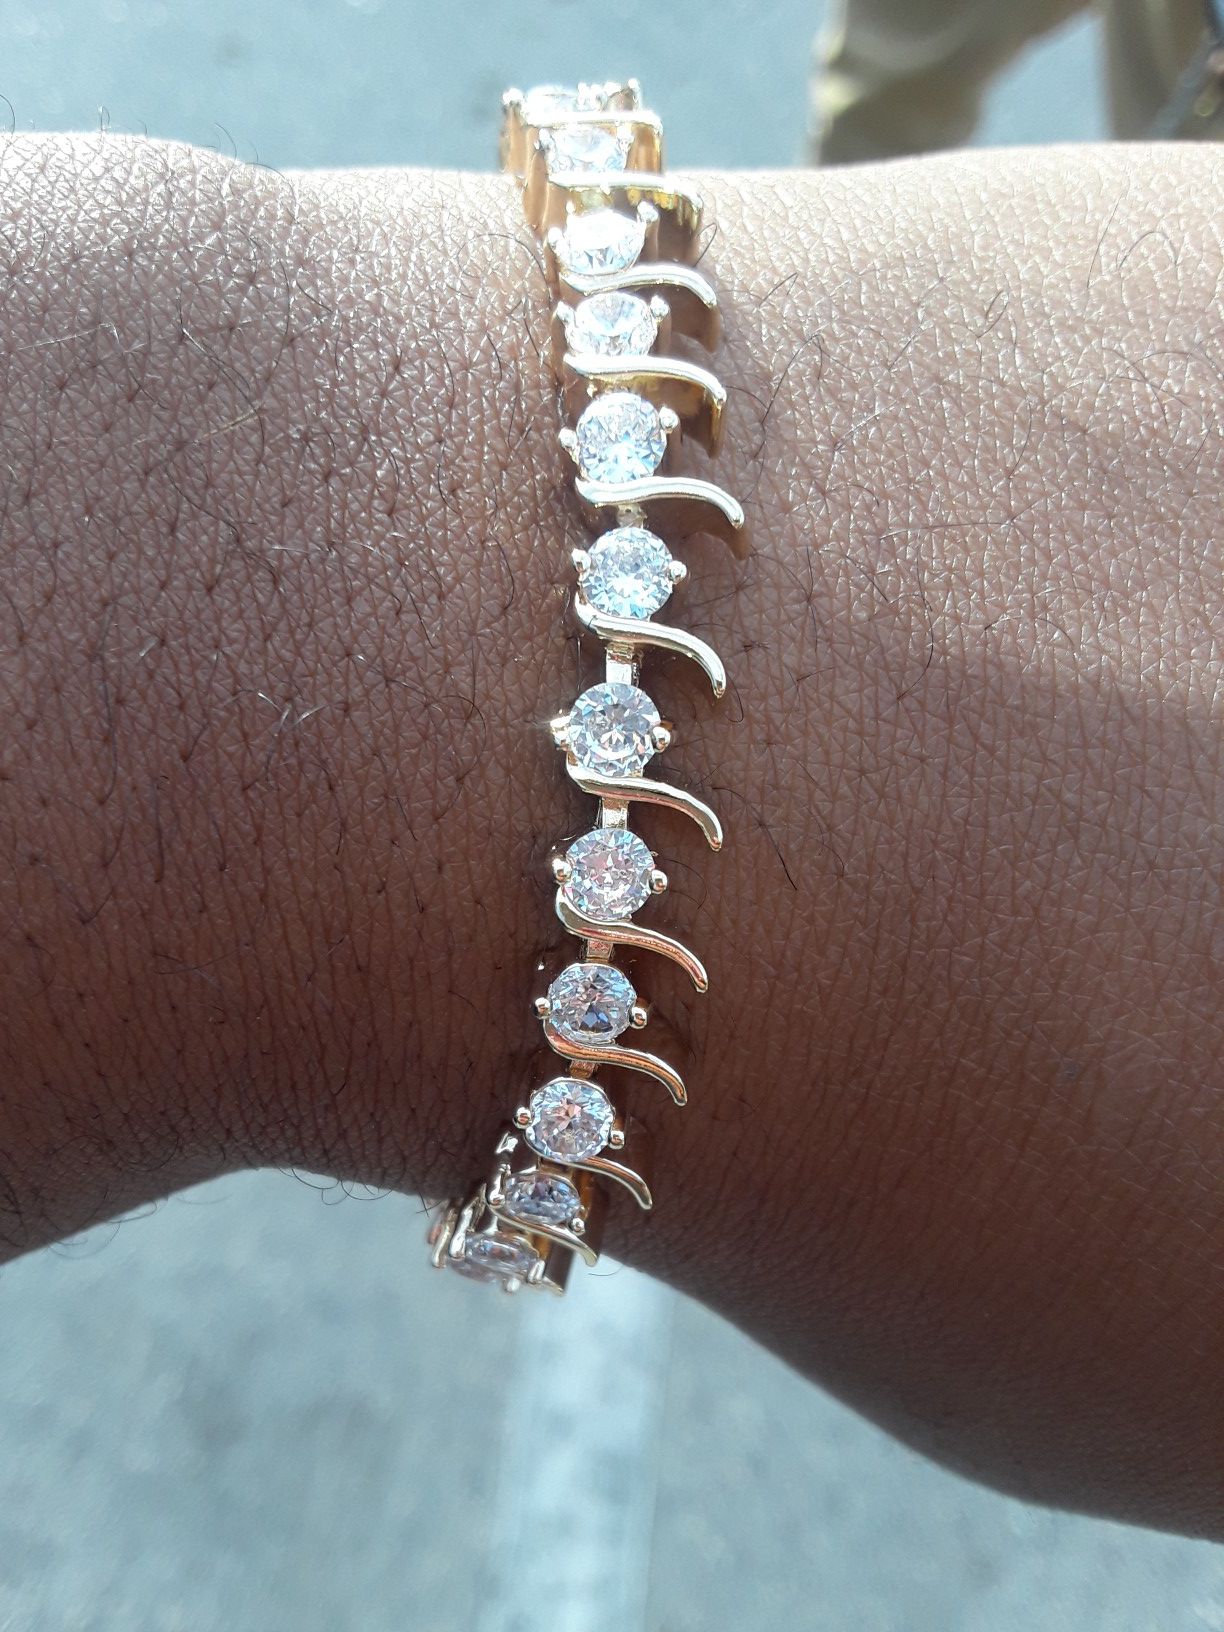 $50 I DELIVER⚘💎💎⚘14kt Gold filled tennis bracelet will not fade or tarnish guaranteed